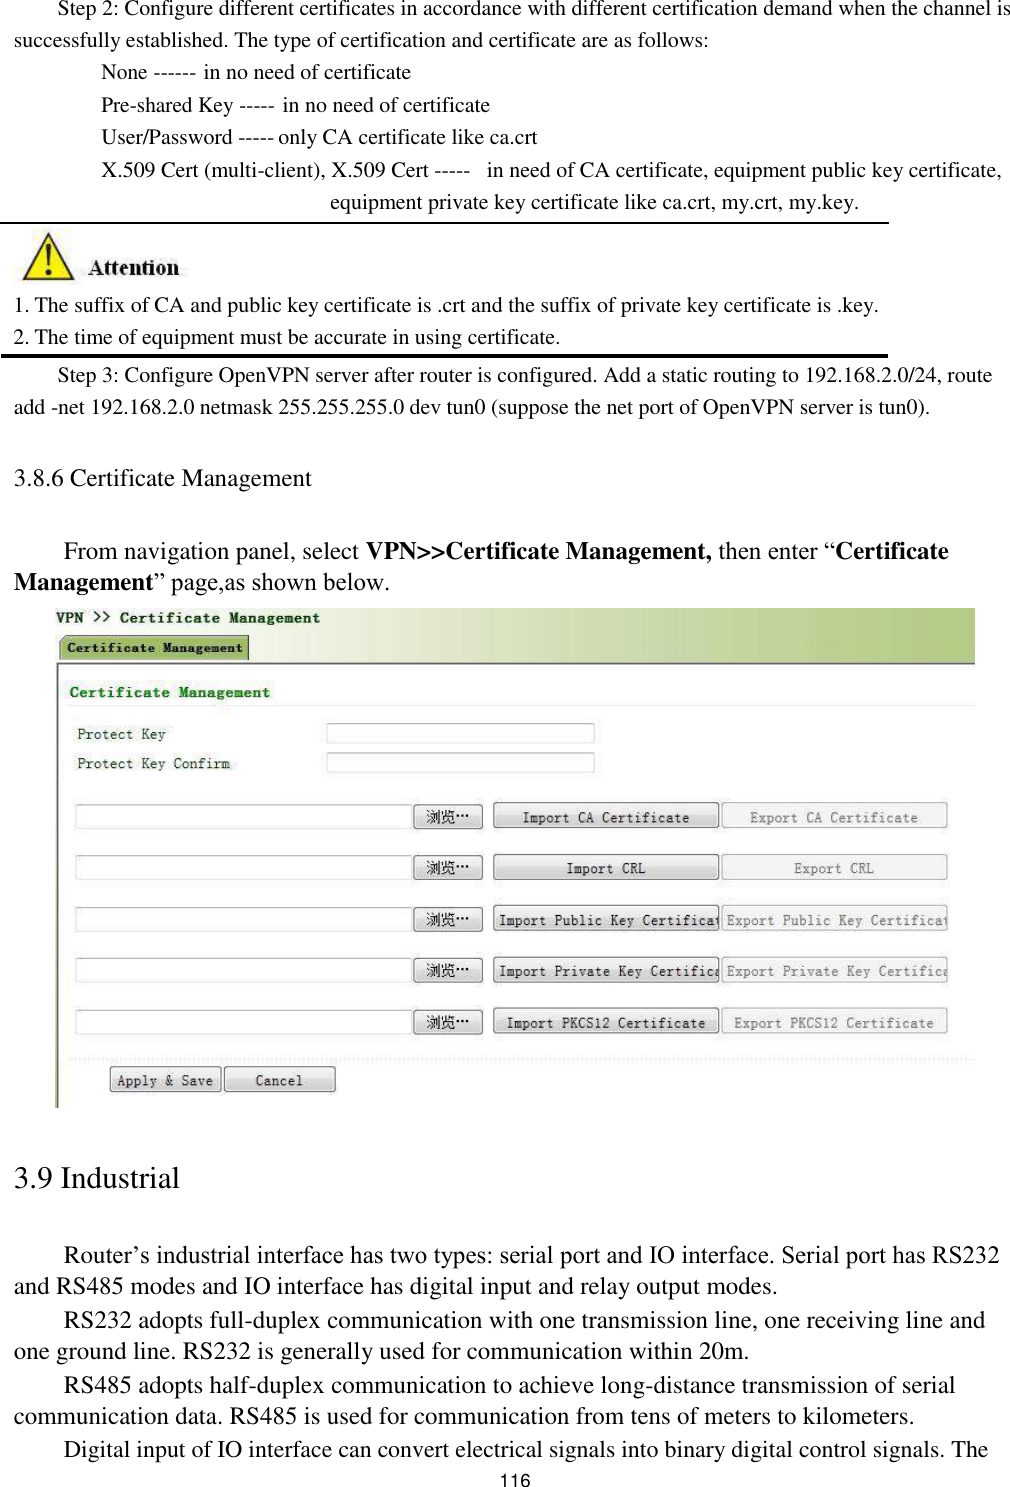  Step 2: Configure different certificates in accordance with different certification demand when the channel is successfully established. The type of certification and certificate are as follows:  None ------ in no need of certificate   Pre-shared Key ----- in no need of certificate User/Password ----- only CA certificate like ca.crt X.509 Cert (multi-client), X.509 Cert ----- in need of CA certificate, equipment public key certificate,   equipment private key certificate like ca.crt, my.crt, my.key.         1. The suffix of CA and public key certificate is .crt and the suffix of private key certificate is .key.  2. The time of equipment must be accurate in using certificate.  Step 3: Configure OpenVPN server after router is configured. Add a static routing to 192.168.2.0/24, route add -net 192.168.2.0 netmask 255.255.255.0 dev tun0 (suppose the net port of OpenVPN server is tun0).  3.8.6 Certificate Management   From navigation panel, select VPN&gt;&gt;Certificate Management, then enter “Certificate Management” page,as shown below.                           3.9 Industrial   Router’s industrial interface has two types: serial port and IO interface. Serial port has RS232 and RS485 modes and IO interface has digital input and relay output modes.  RS232 adopts full-duplex communication with one transmission line, one receiving line and one ground line. RS232 is generally used for communication within 20m.  RS485 adopts half-duplex communication to achieve long-distance transmission of serial communication data. RS485 is used for communication from tens of meters to kilometers.  Digital input of IO interface can convert electrical signals into binary digital control signals. The  116 